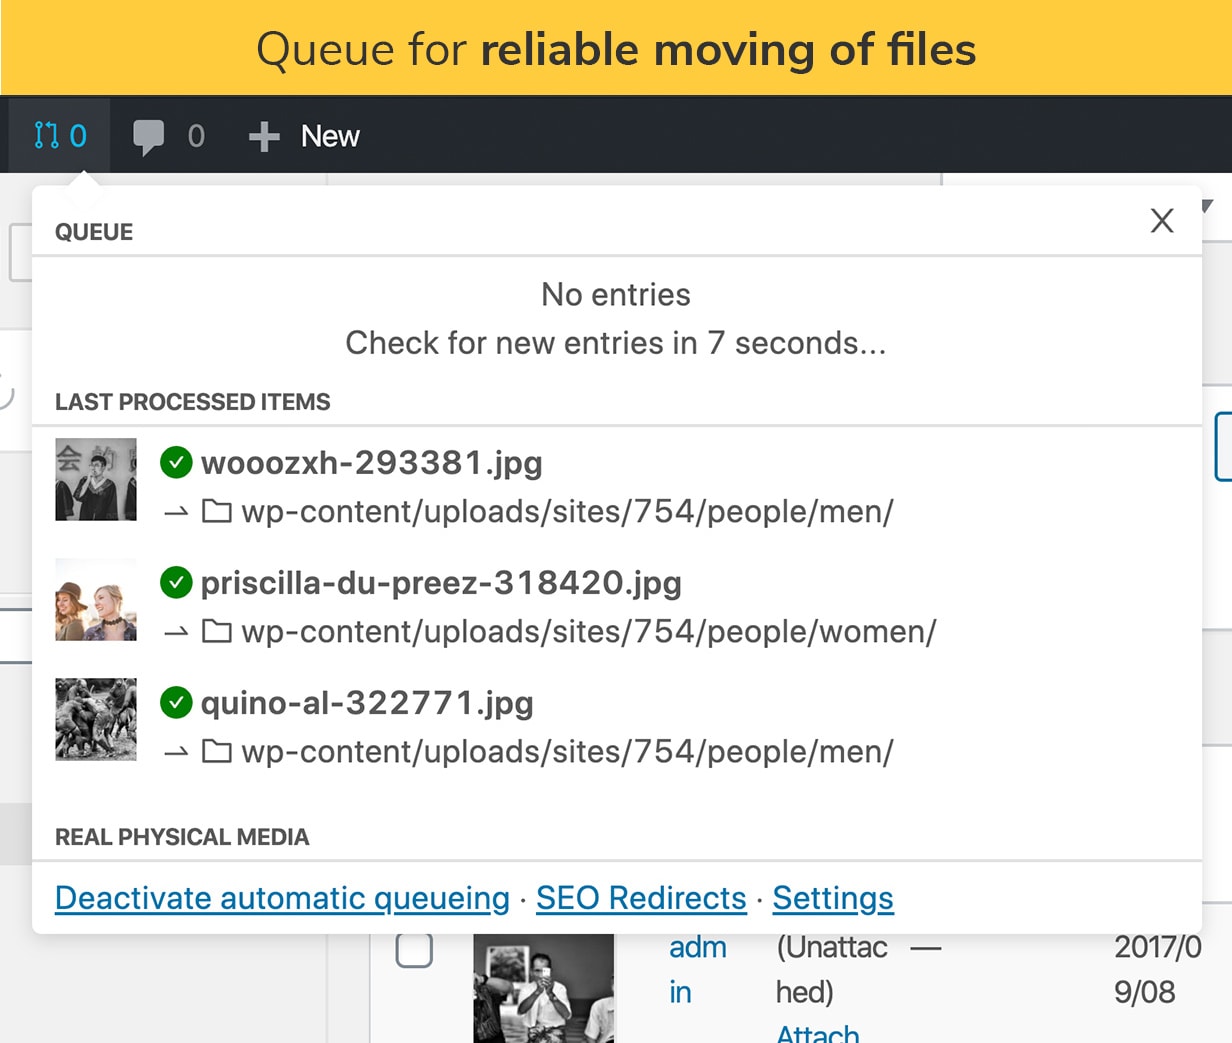 Queue for reliable moving of files